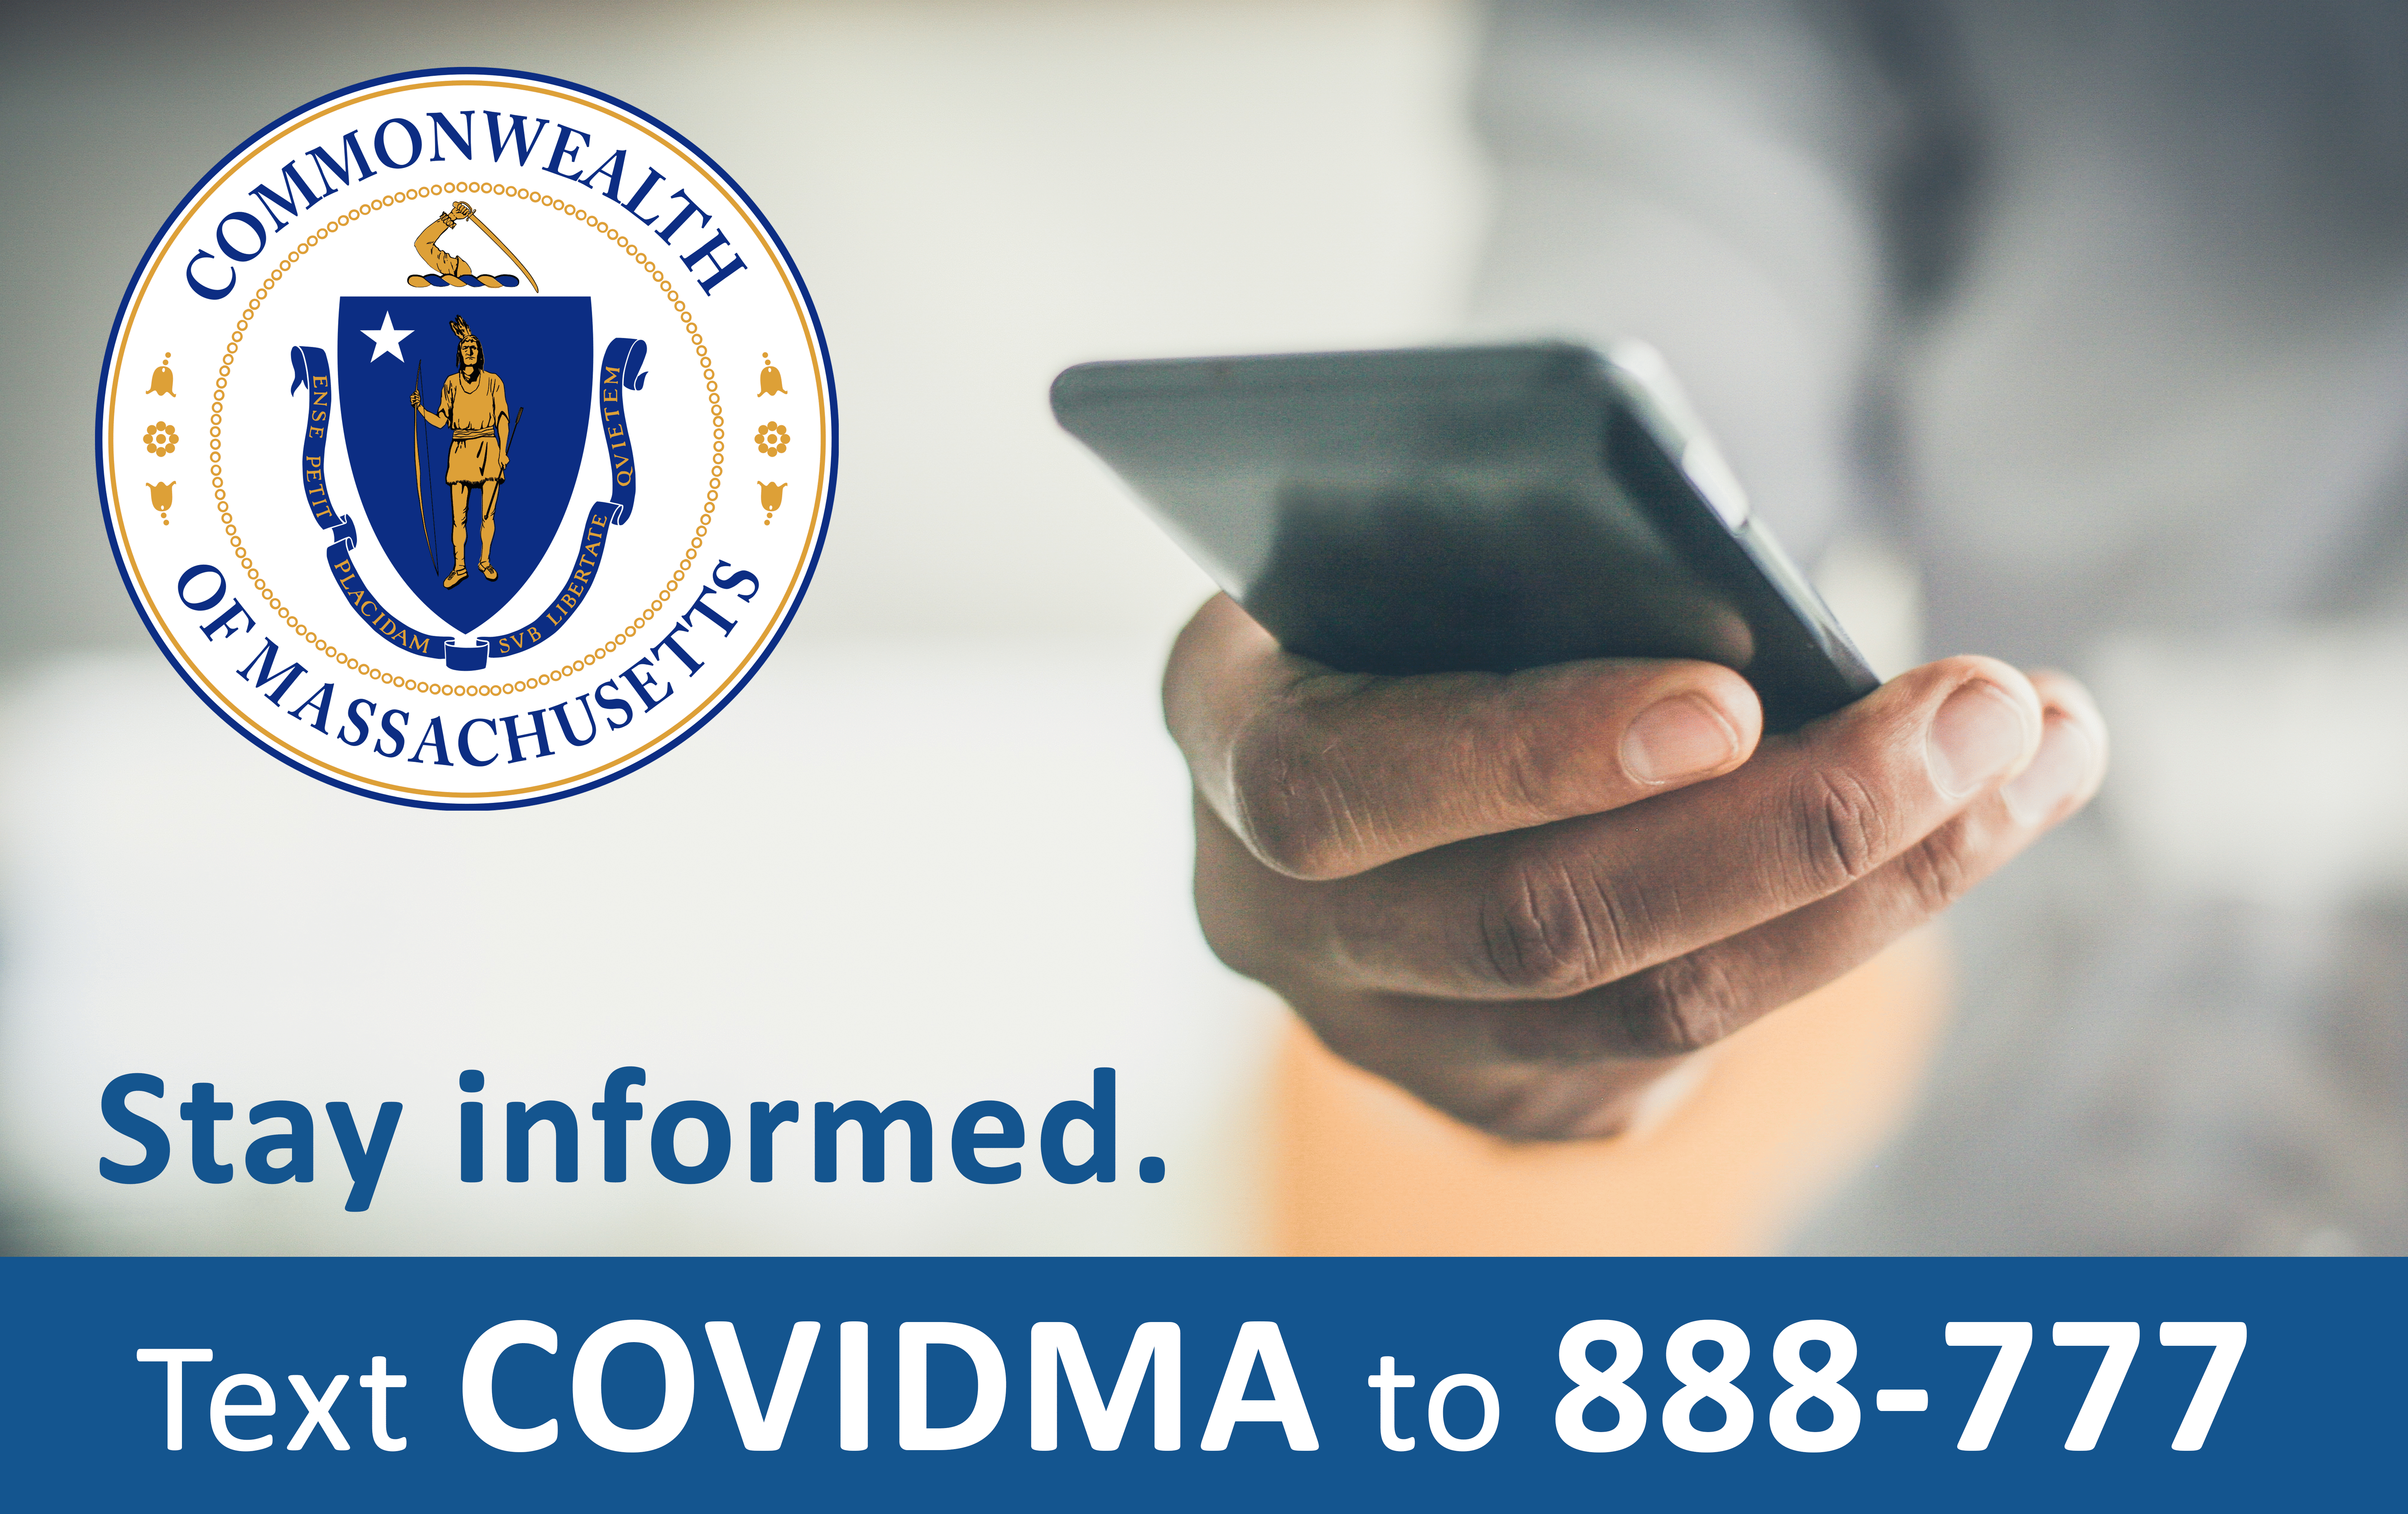 Text alerts available send COVIDMA to 888-777